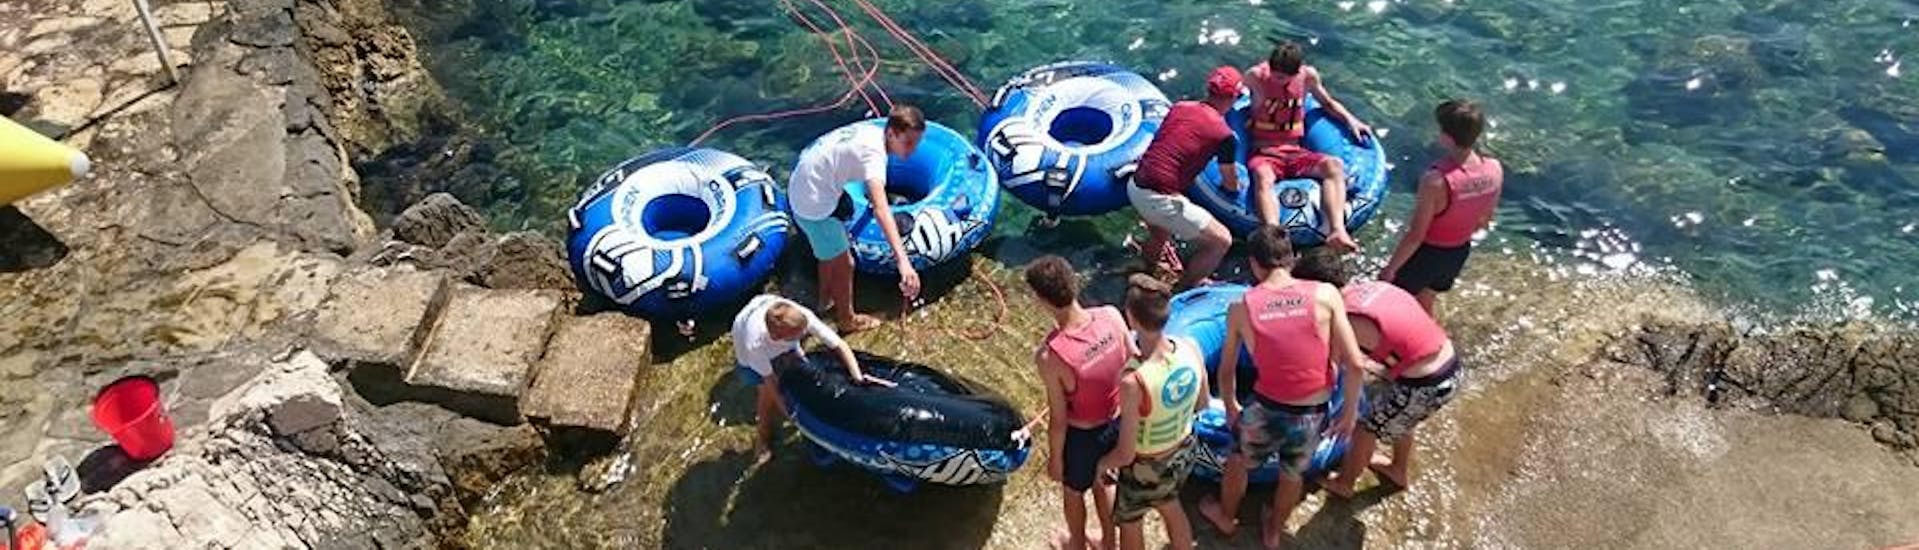 People getting ready for a Water Tube Ride in Kvarner Bay with Water Sport Centar Selce